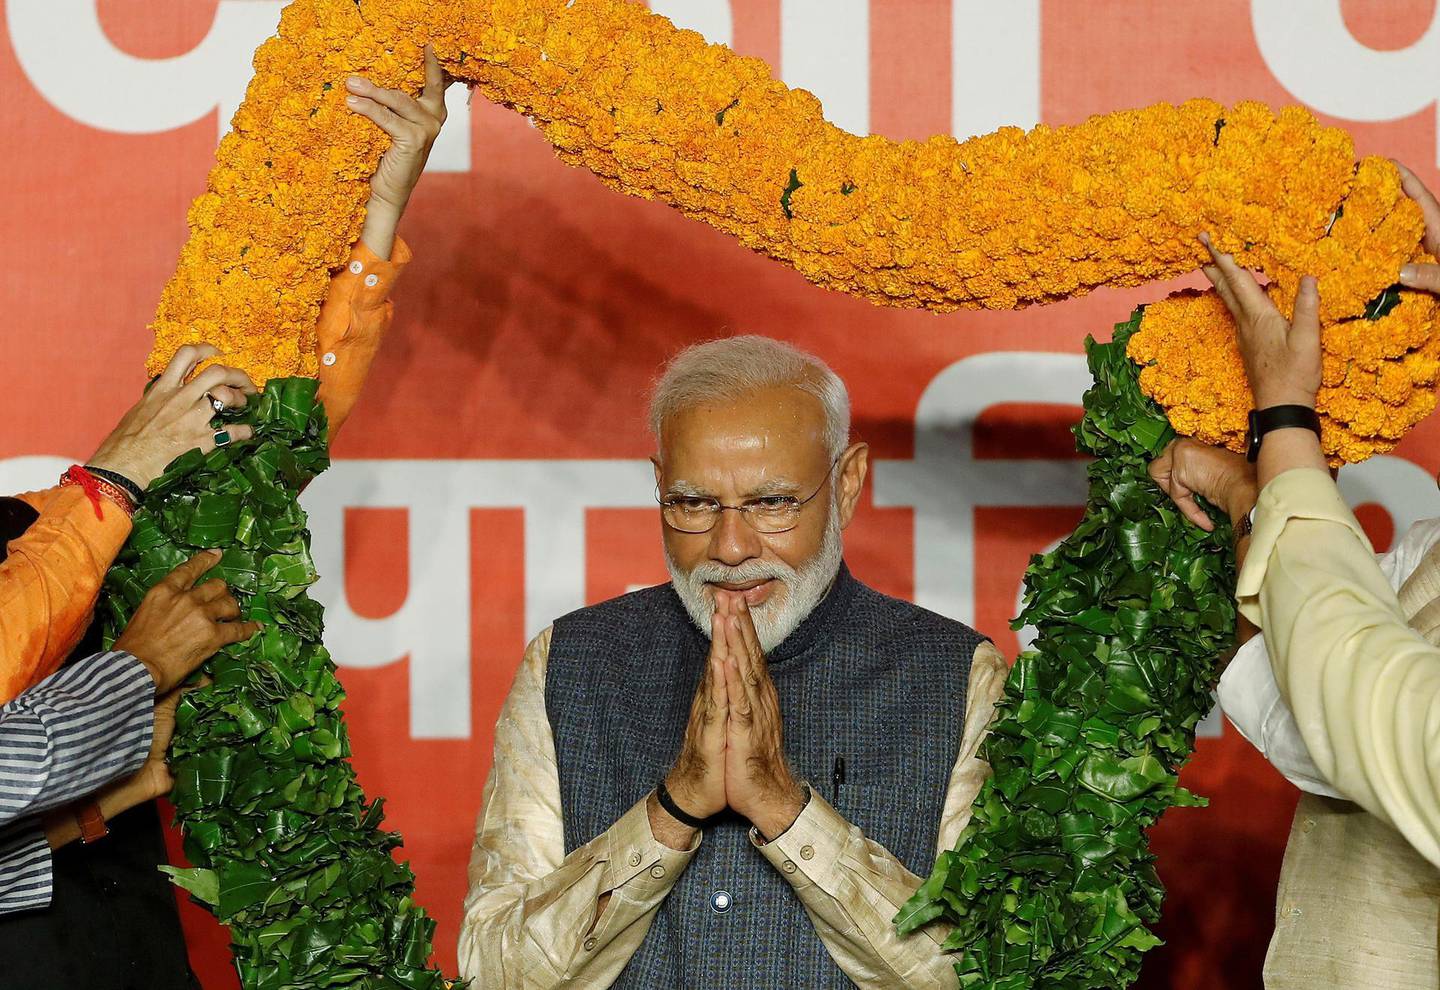 FILE PHOTO: Indian Prime Minister Narendra Modi gestures as he is presented with a garland by Bharatiya Janata Party (BJP) leaders after the election results in New Delhi, India, May 23, 2019. REUTERS/Adnan Abidi/File Photo